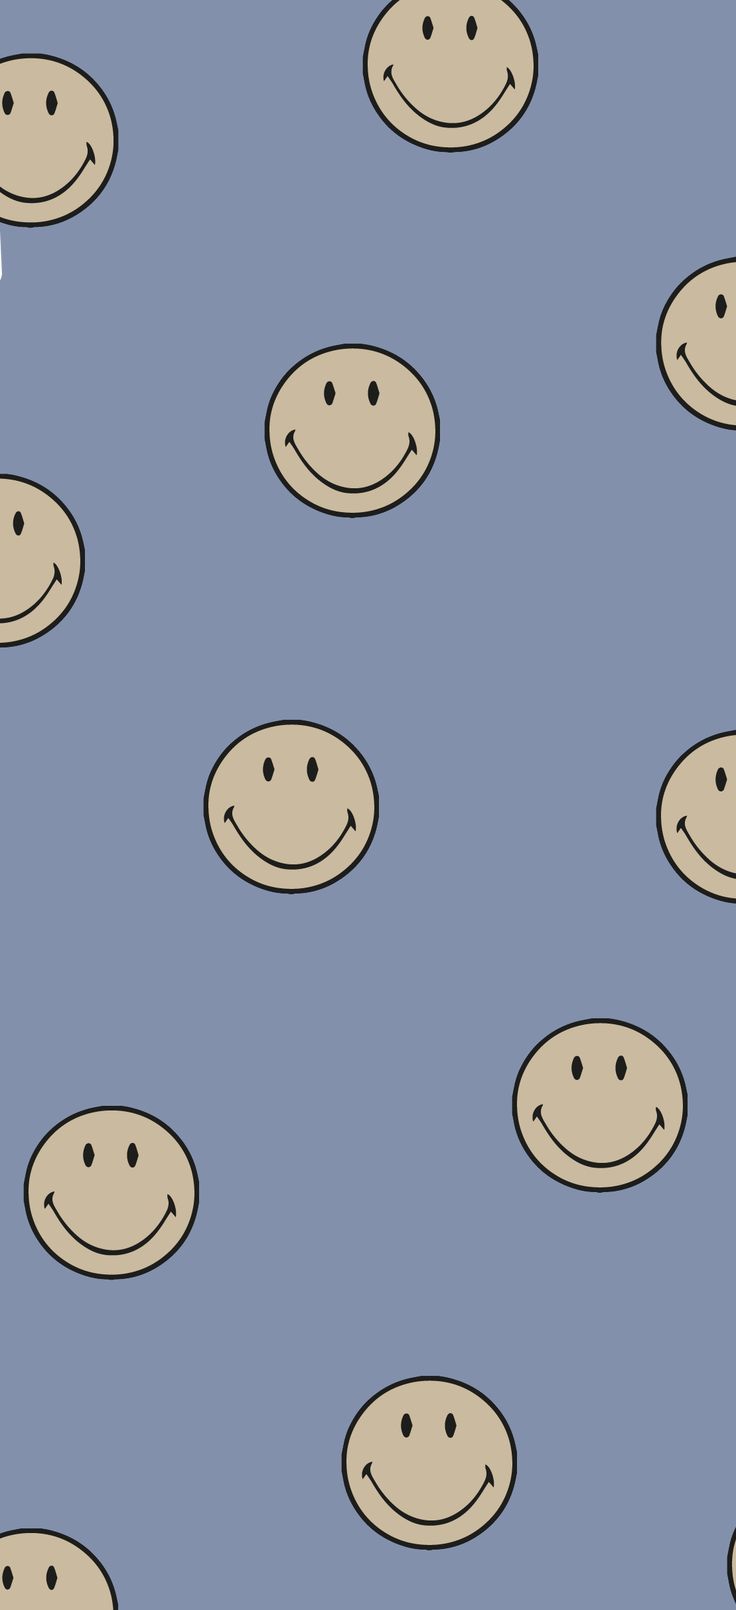 IPhone wallpaper with a pattern of smiling emojis on a blue background - Smile, Smiley